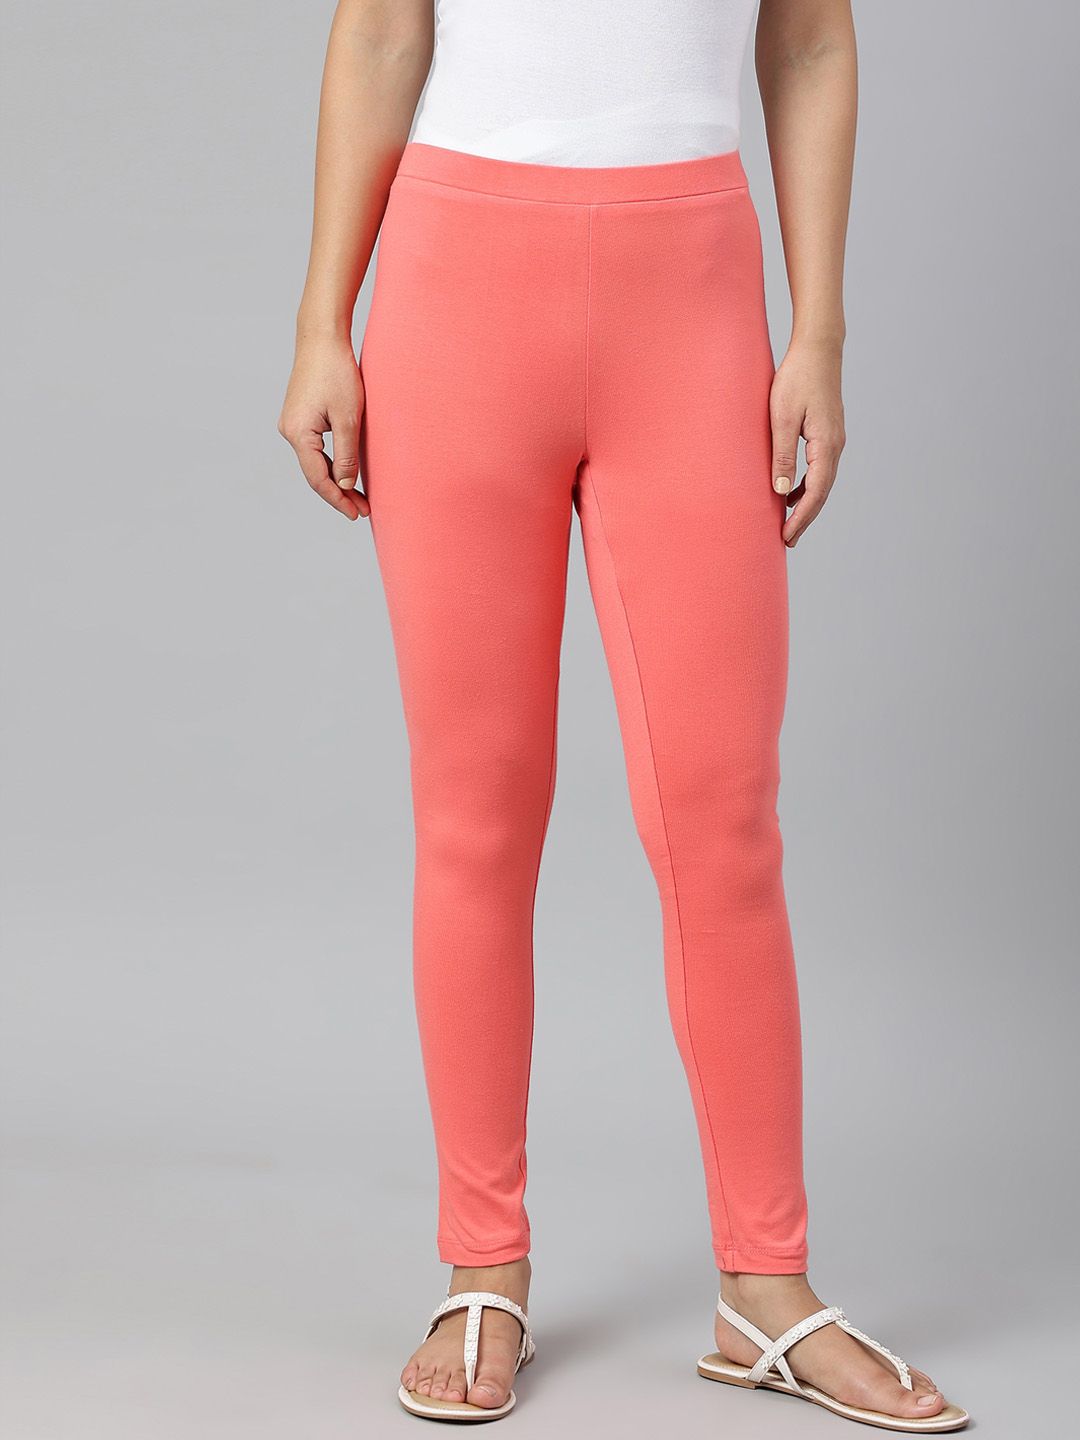 W Women Coral Solid Ankle-Length Leggings Price in India